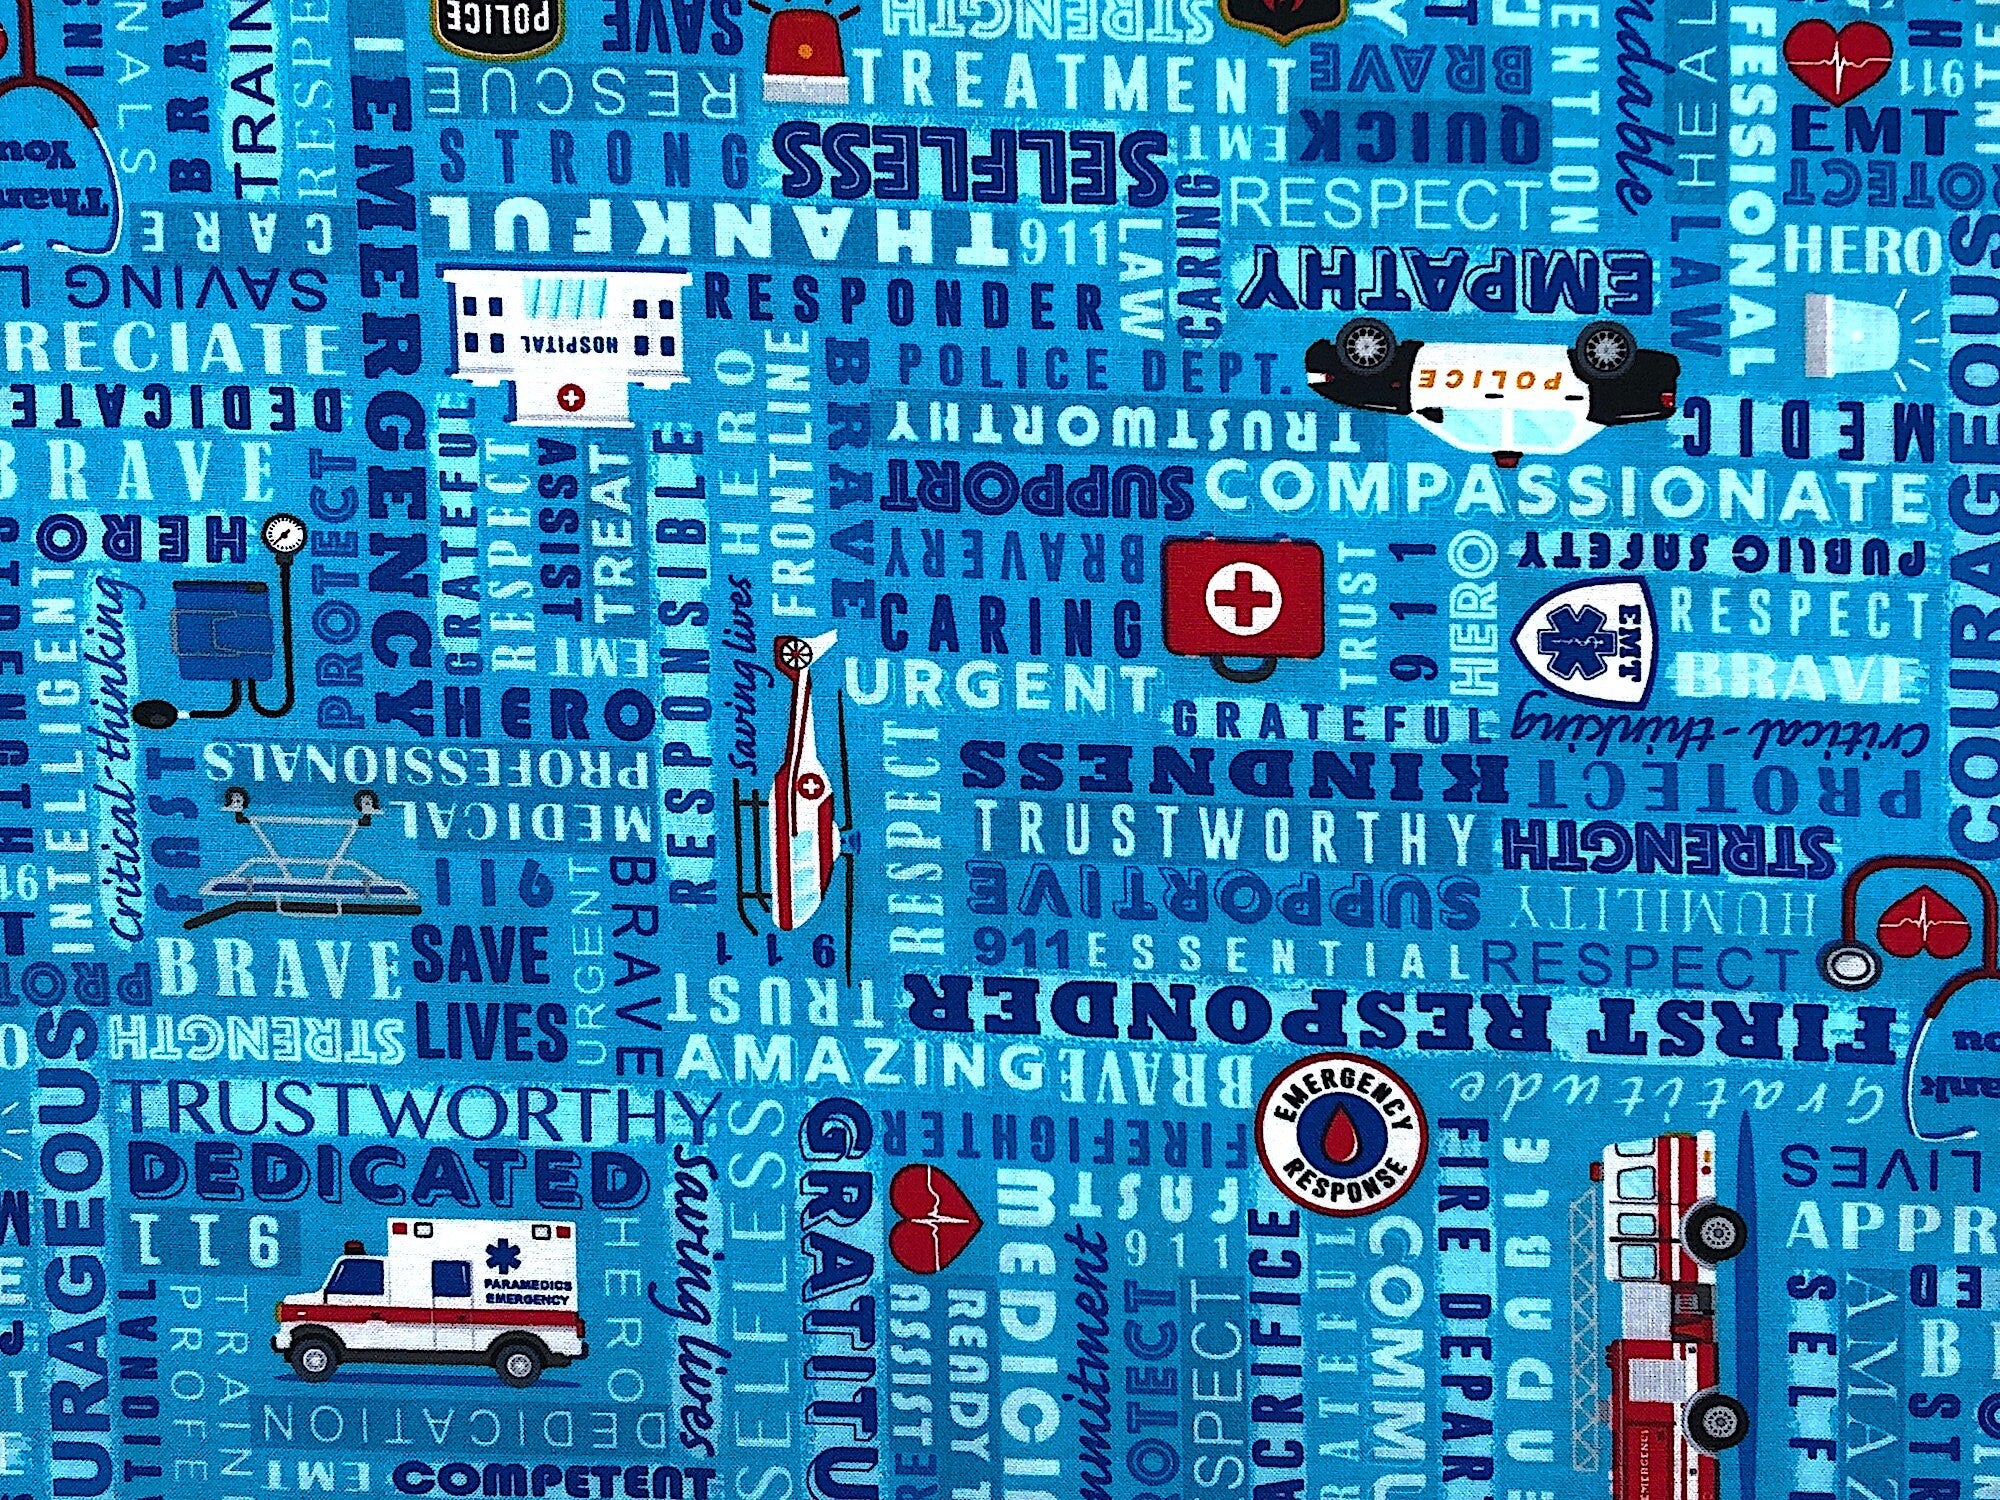 Blue cotton fabric covered with police cars, ambulances and sayings such as trustworthy, strength, respect and more.